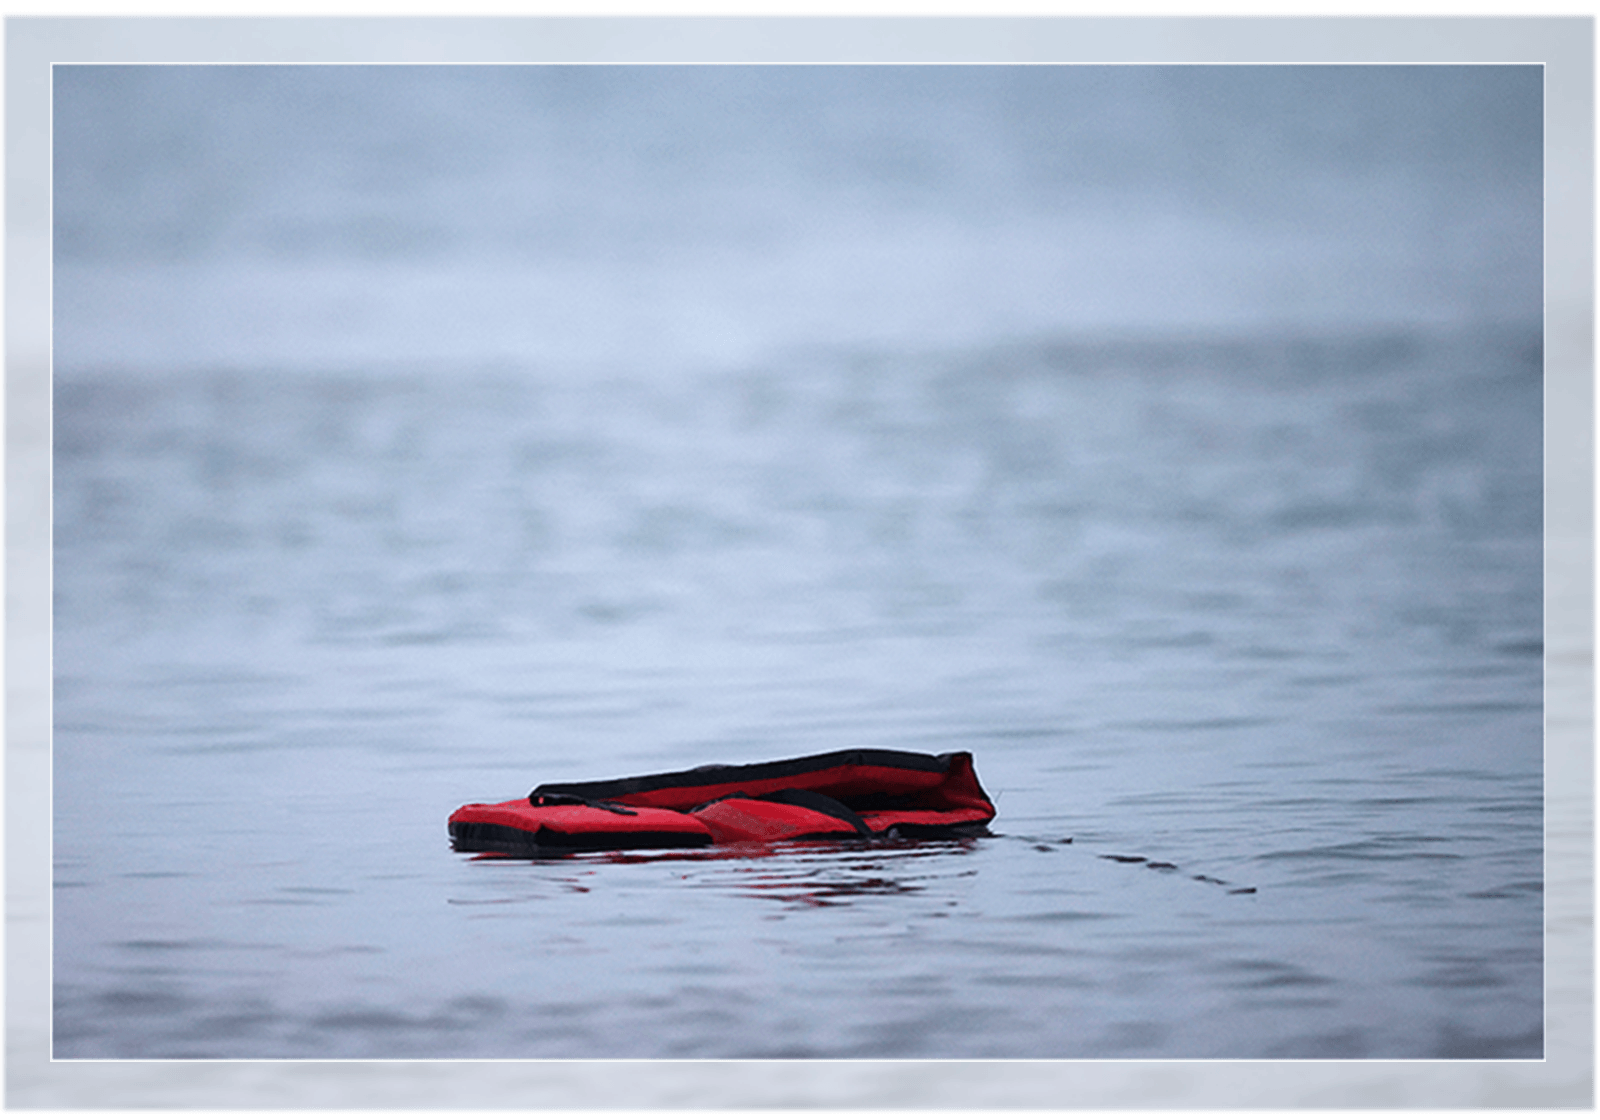 A lifejacket floating in the Channel